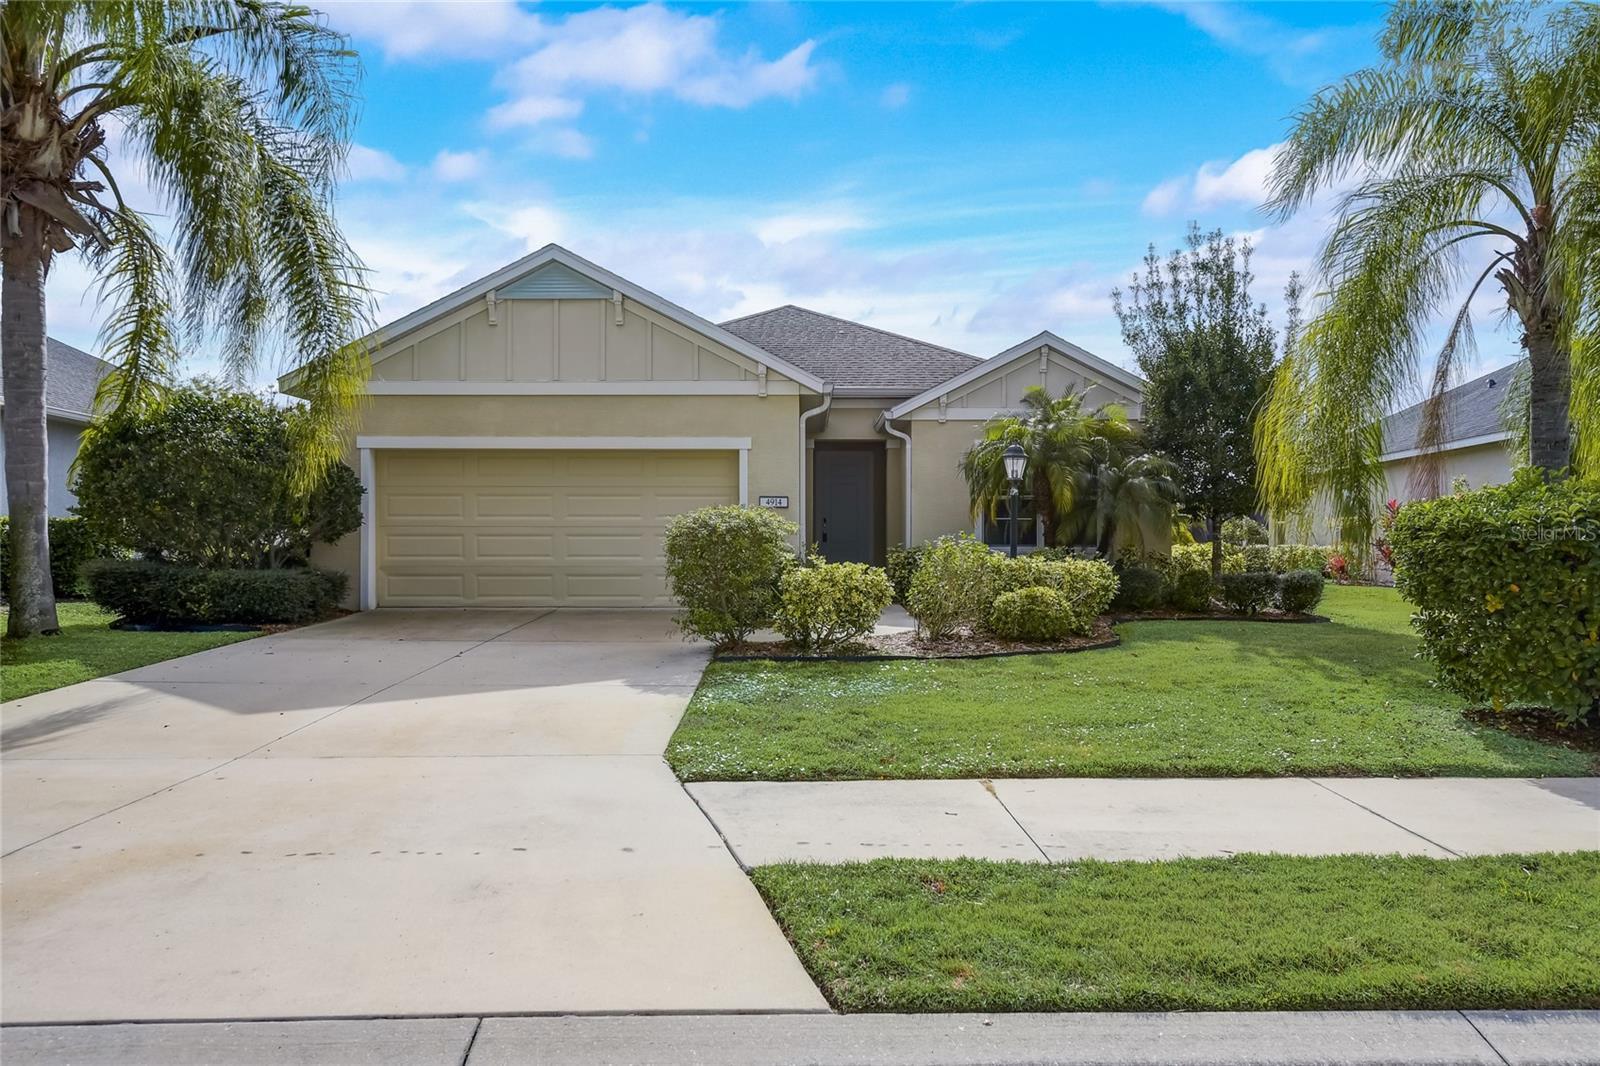 Photo one of 4914 Mission Park Ln Lakewood Ranch FL 34211 | MLS T3463202